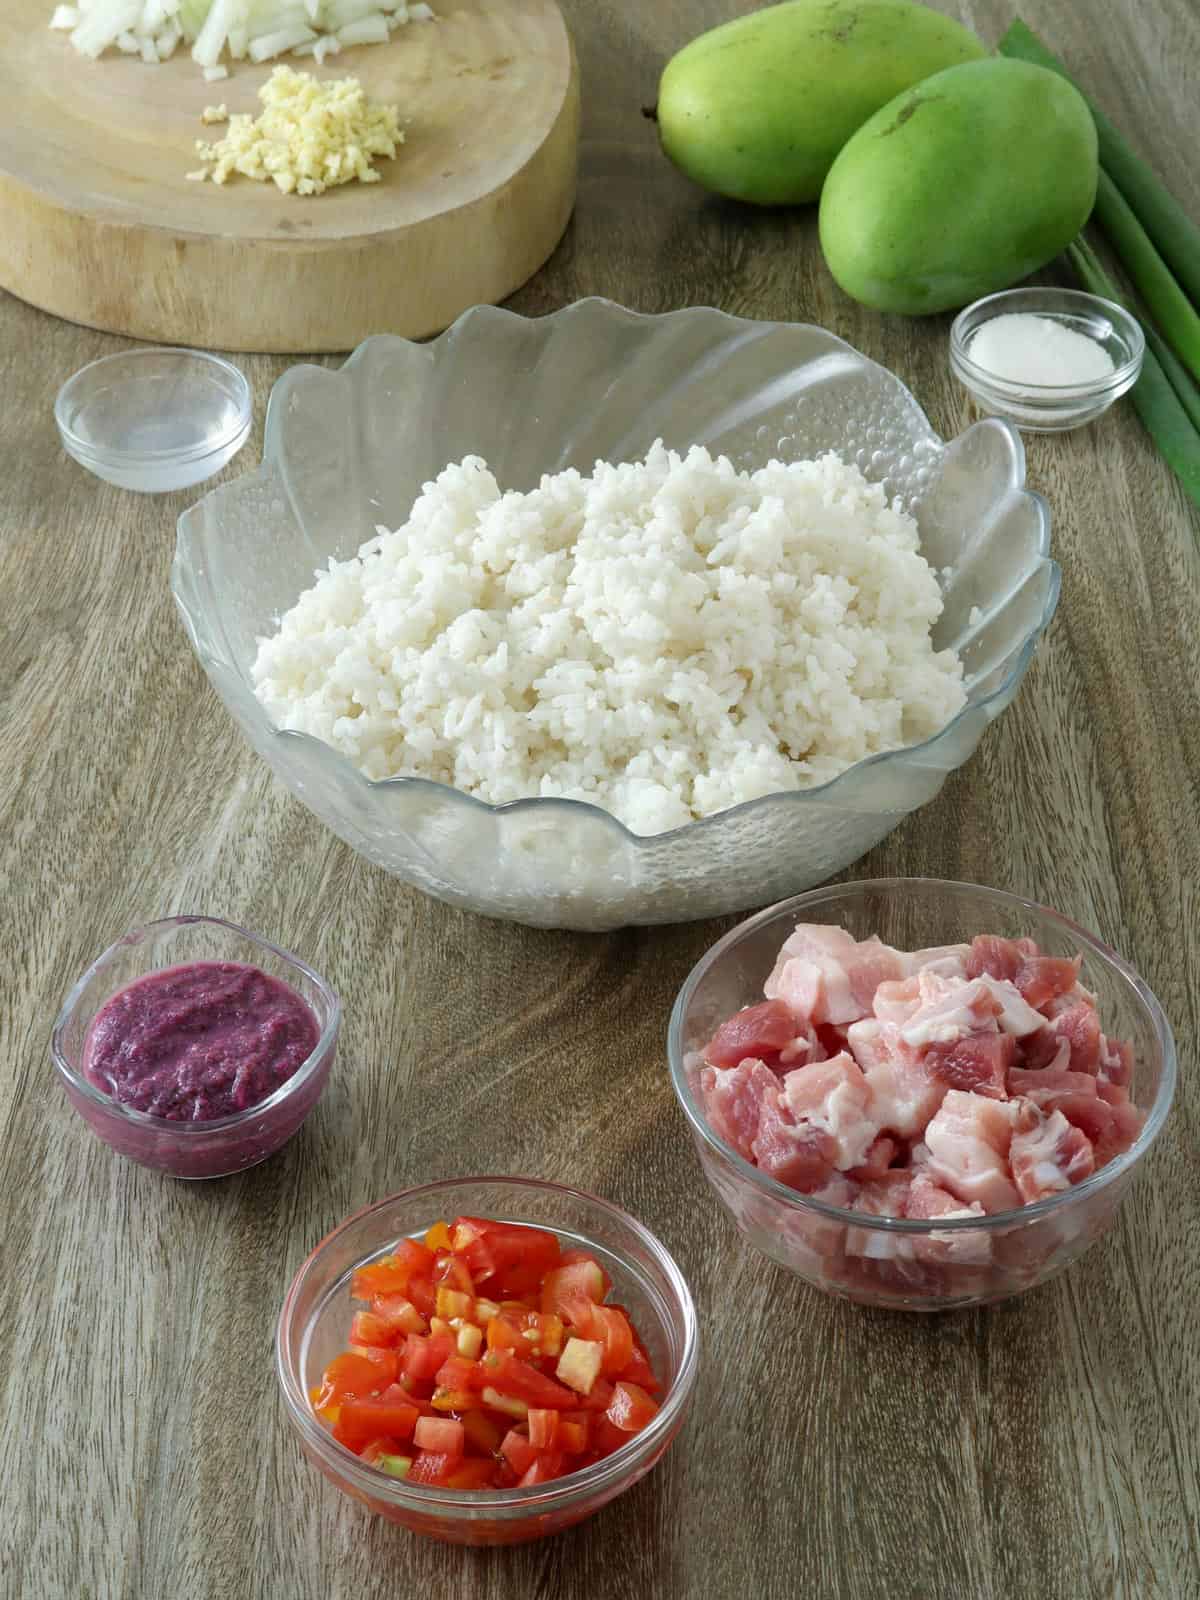 steamed rice, shrimp paste, chopped tomatoes, pork belly, onion, garlic, green mangoes